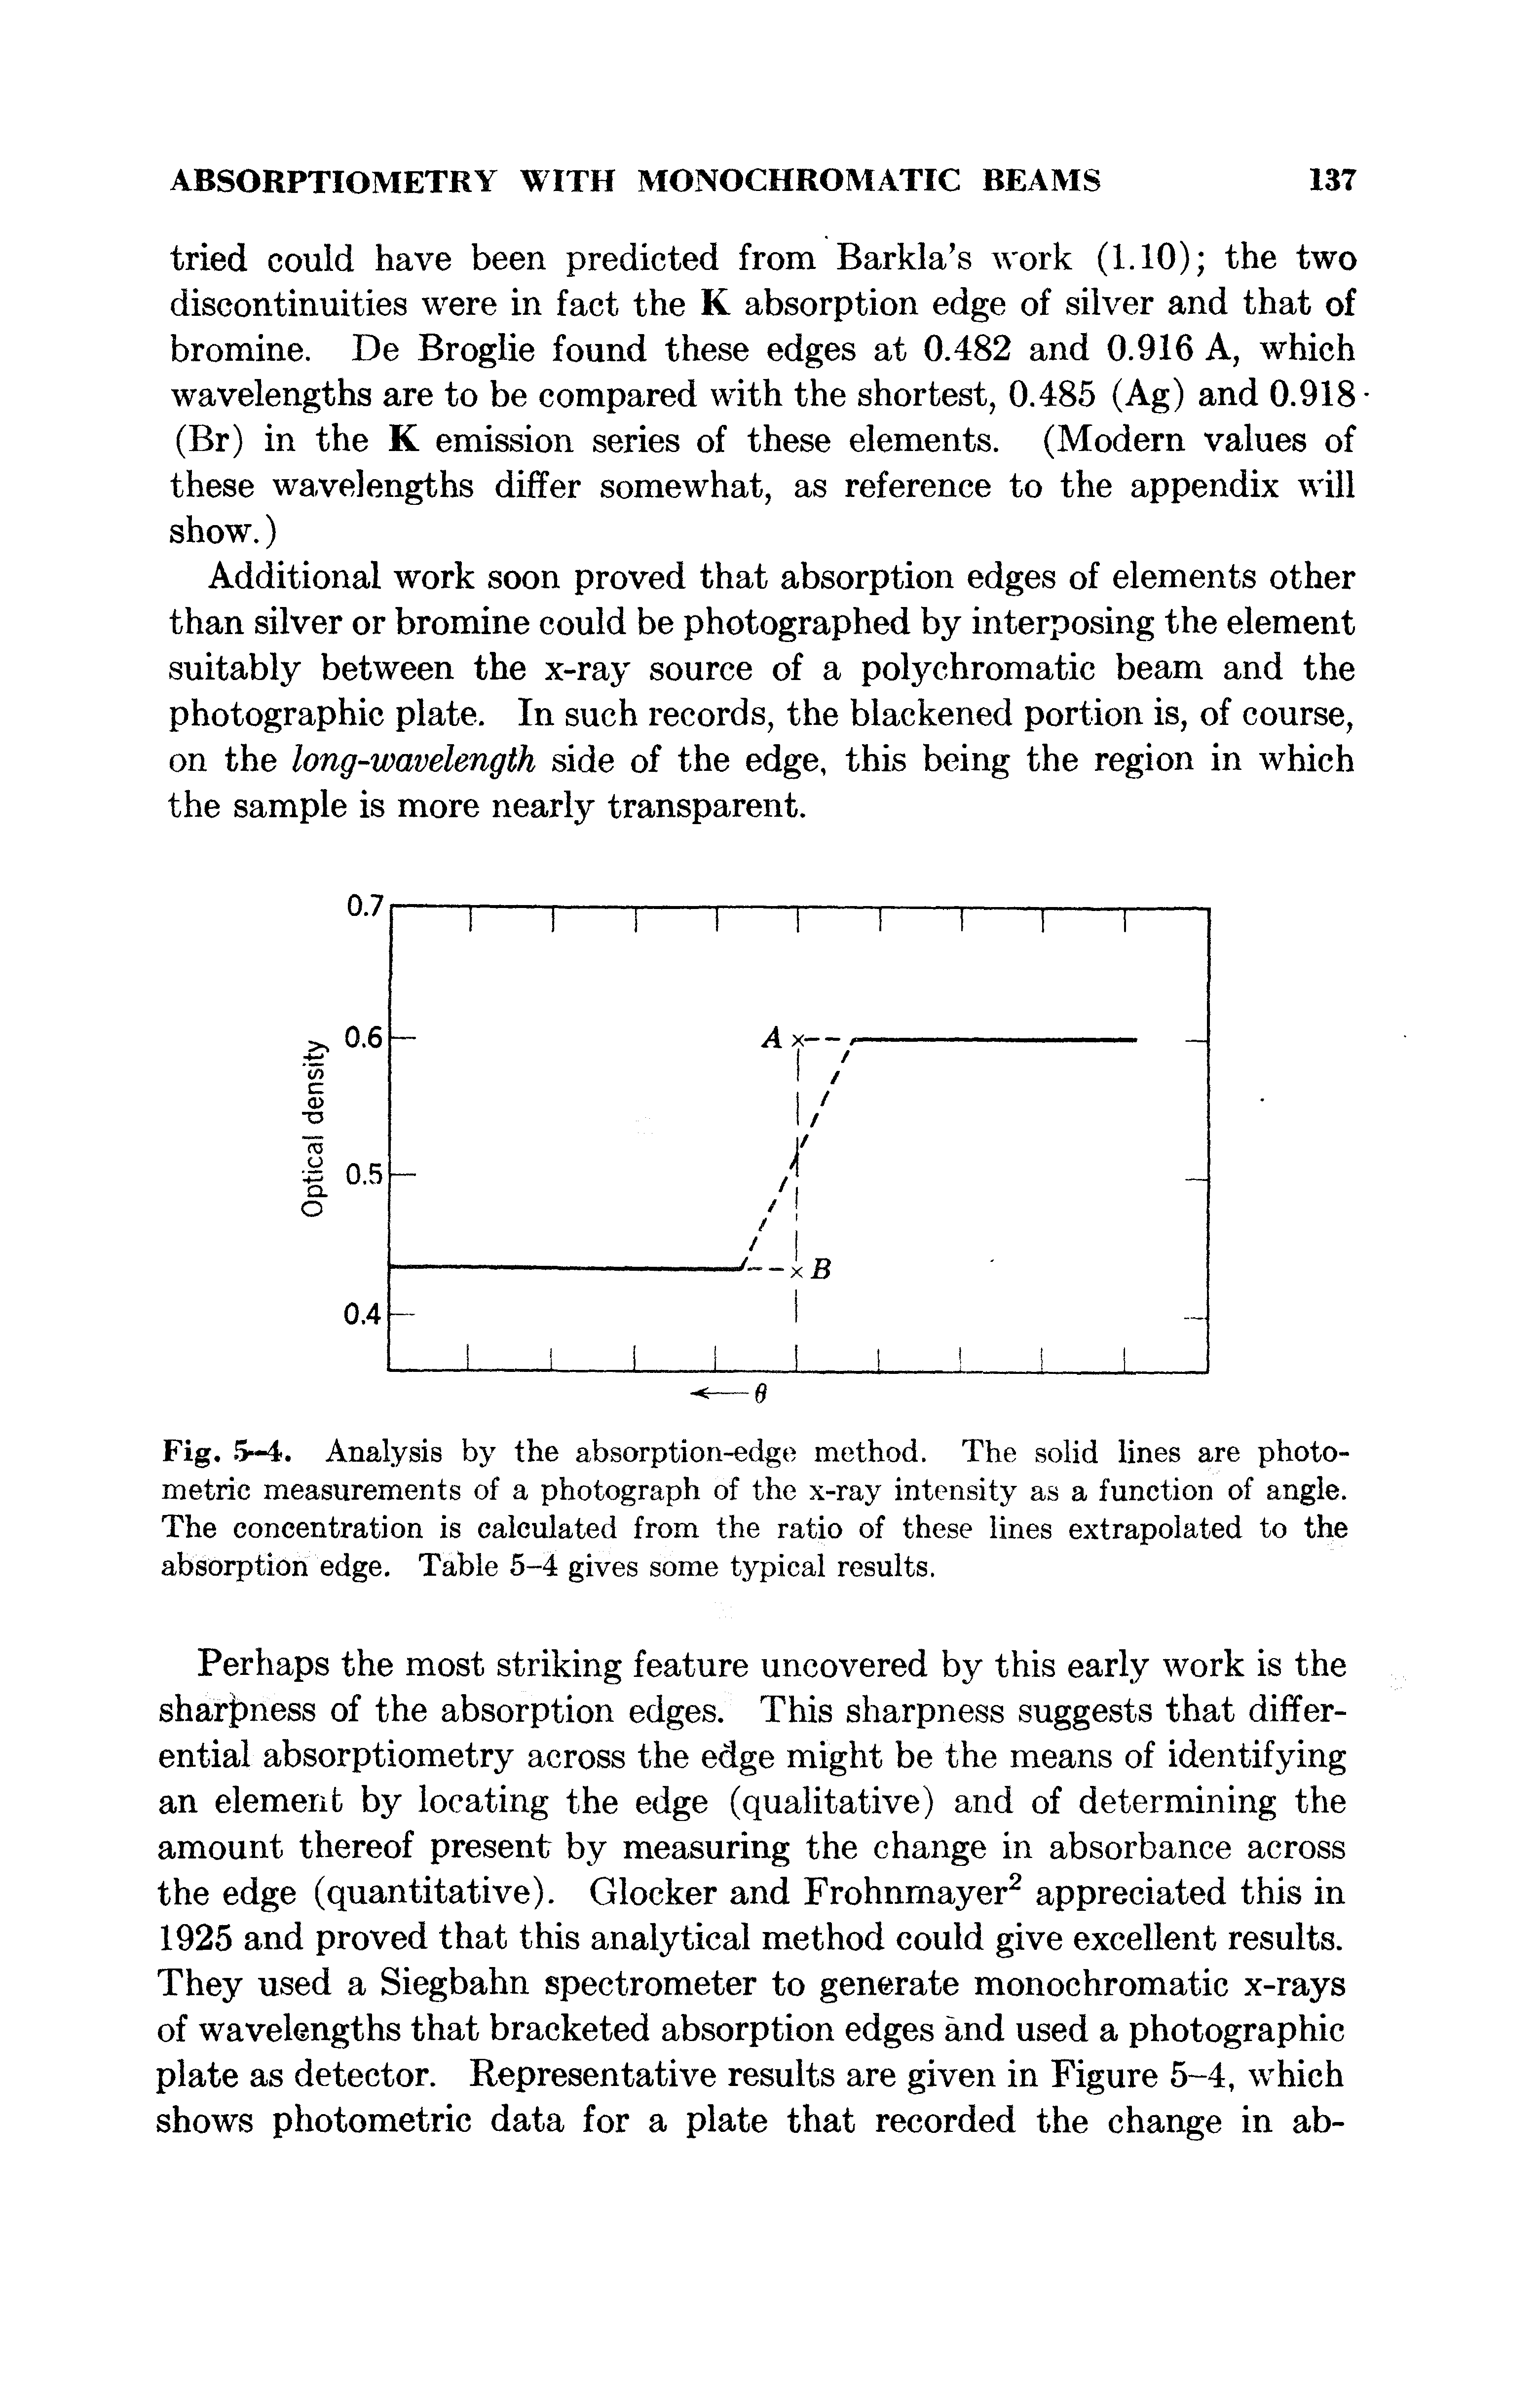 Fig. 5—4. Analysis by the absorption-edge method. The solid lines are photometric measurements of a photograph of the x-ray intensity as a function of angle. The concentration is calculated from the ratio of these lines extrapolated to the absorption edge. Table 5-4 gives some typical results.